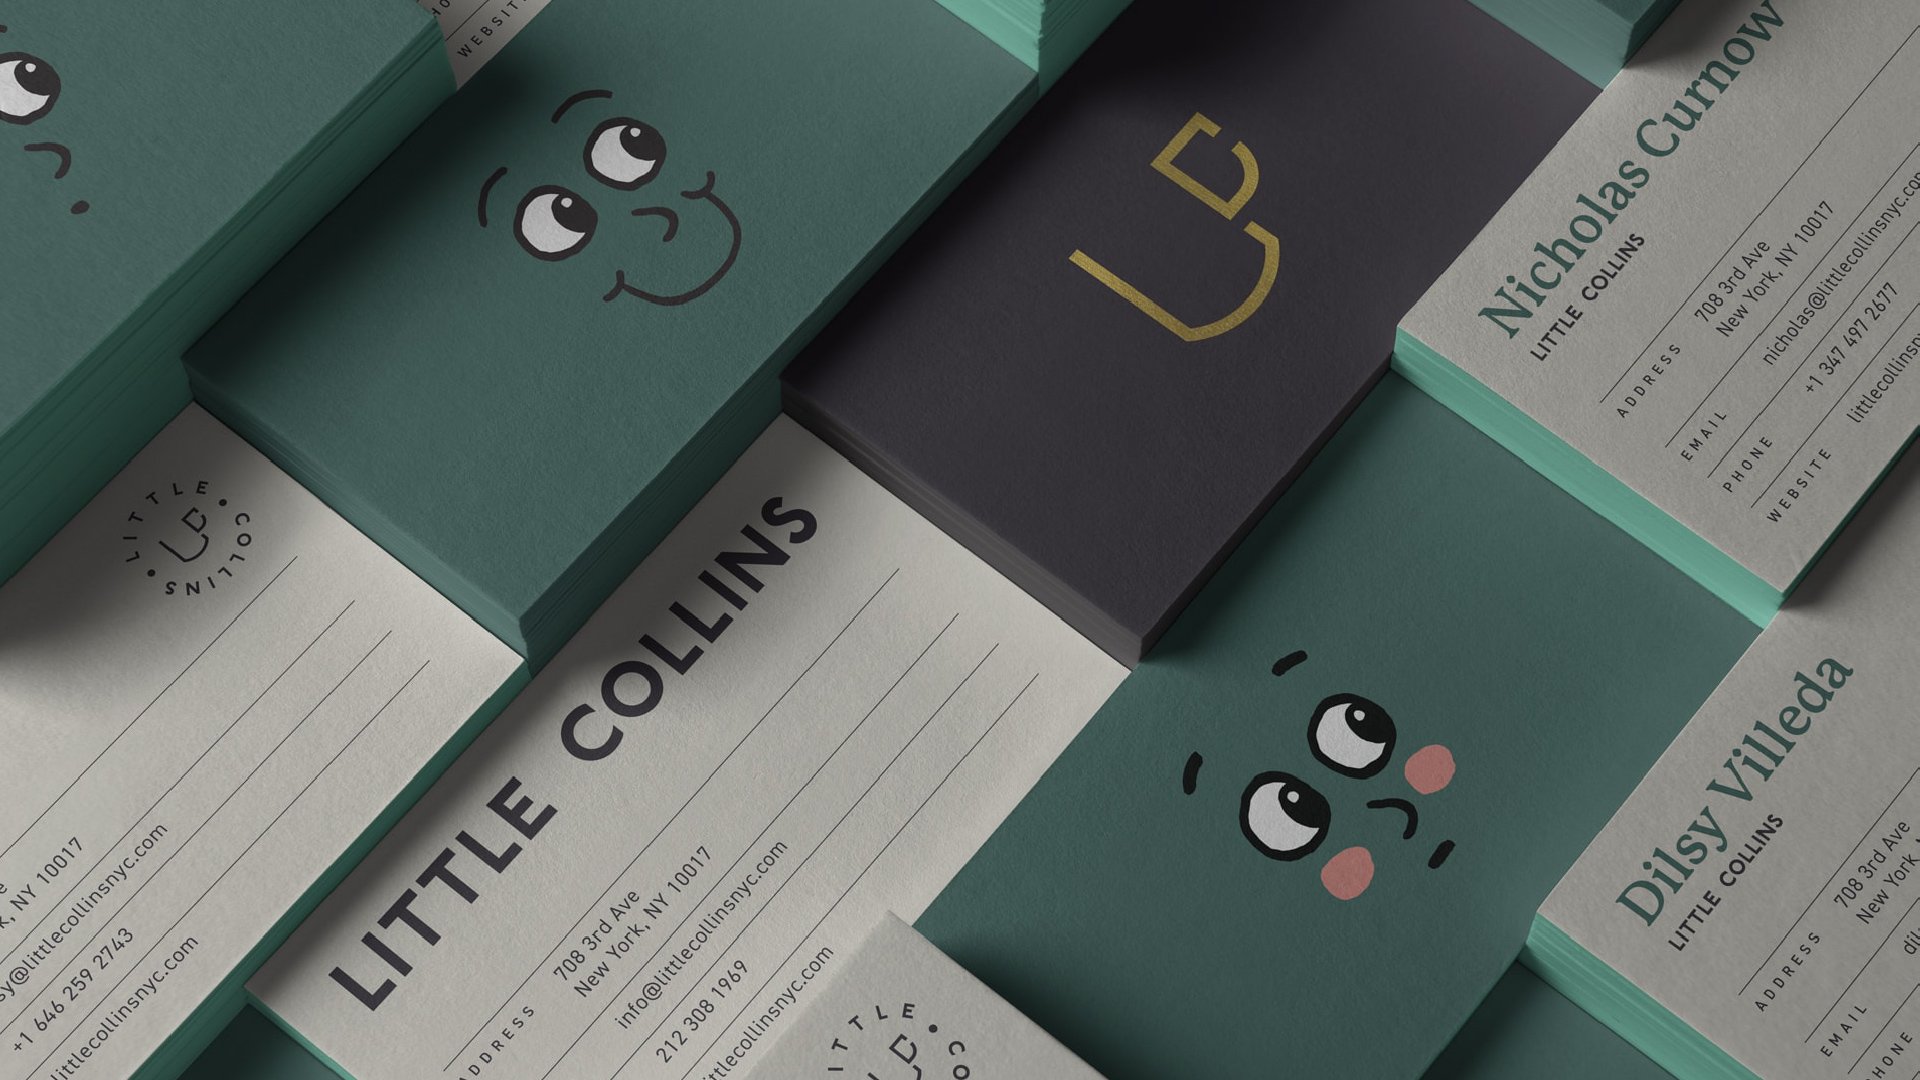 Business cards feature the many faces of Collin – one smiling and one embarrassed – as well as the Little Collins watermark. The back of the card has the contact information of those who work at Little Collins.